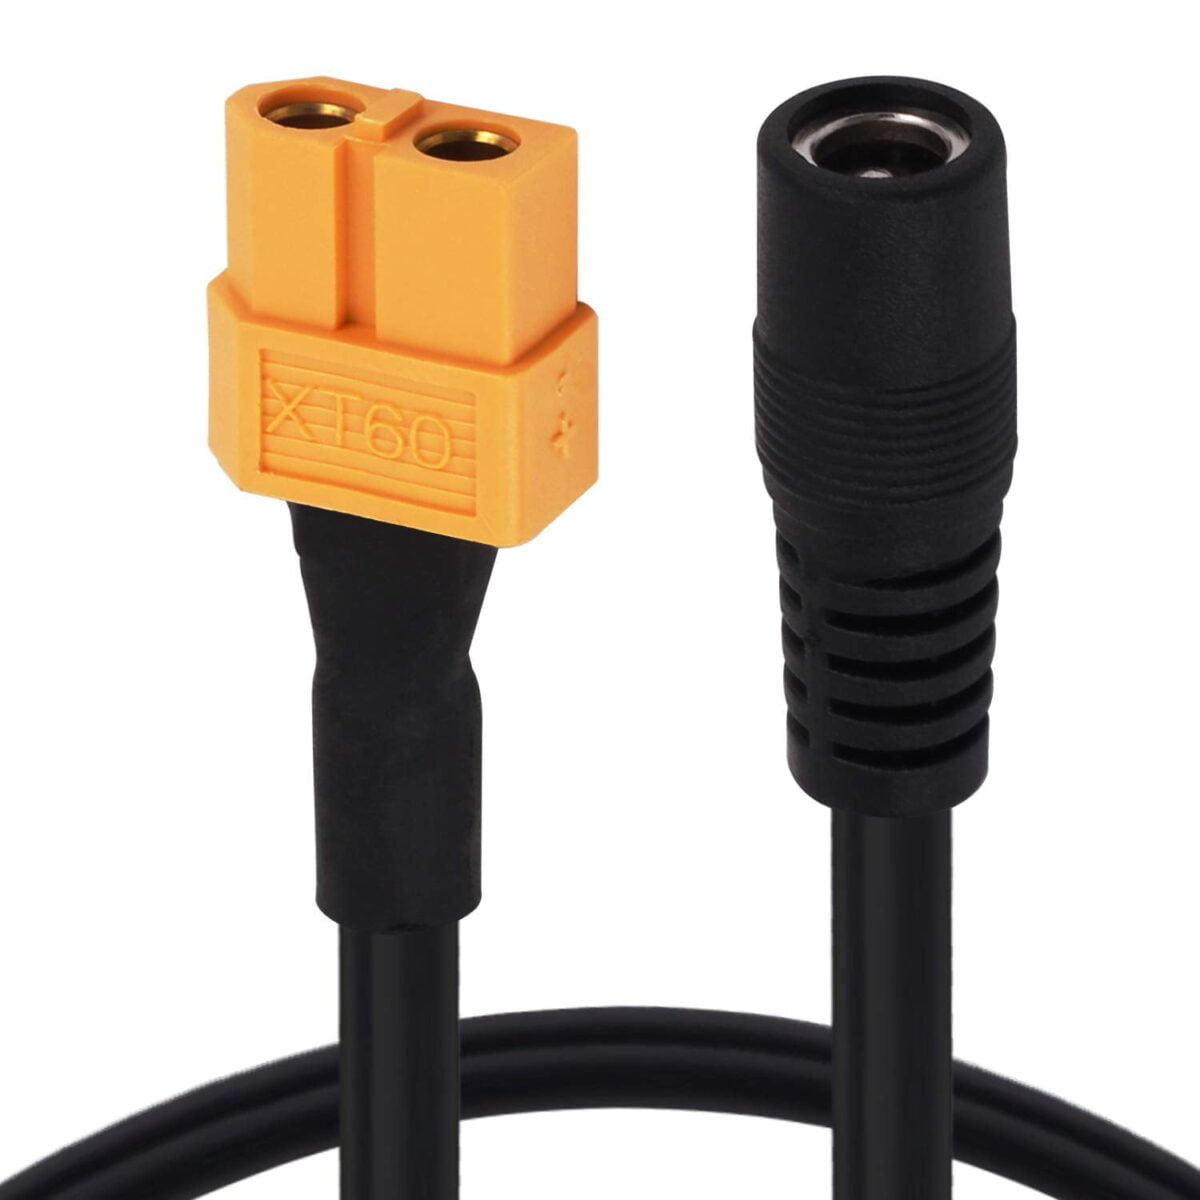 XT-60 Female to Female DC 5.5mm X 2.5mm Jack Power Adapter Cable